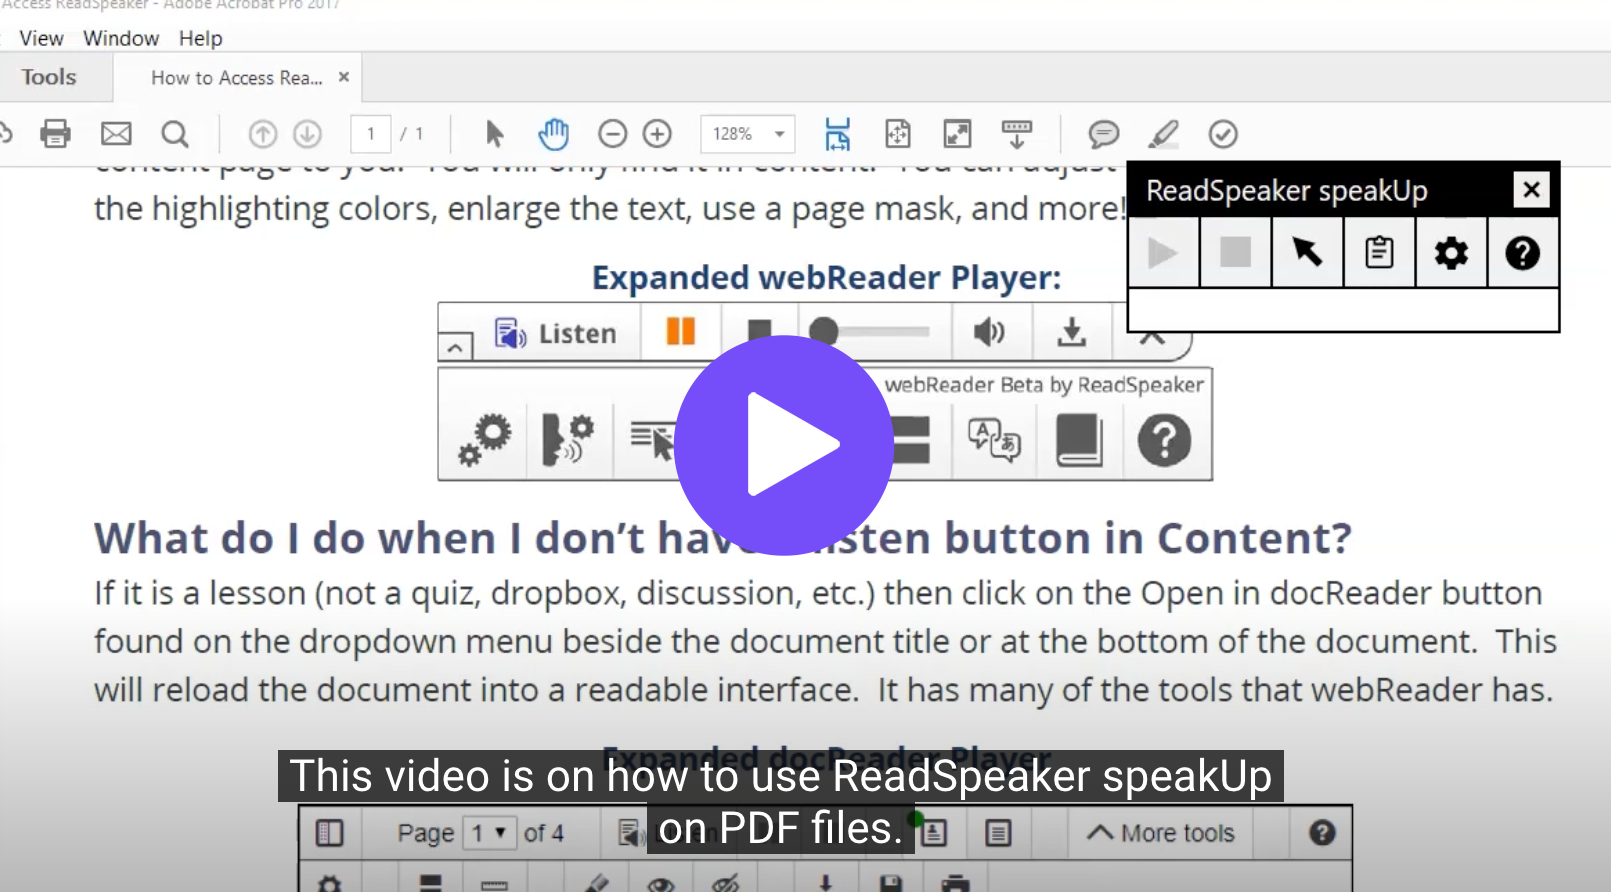 screenshot of video on how to use ReadSpeaker speakUp on PDF files.